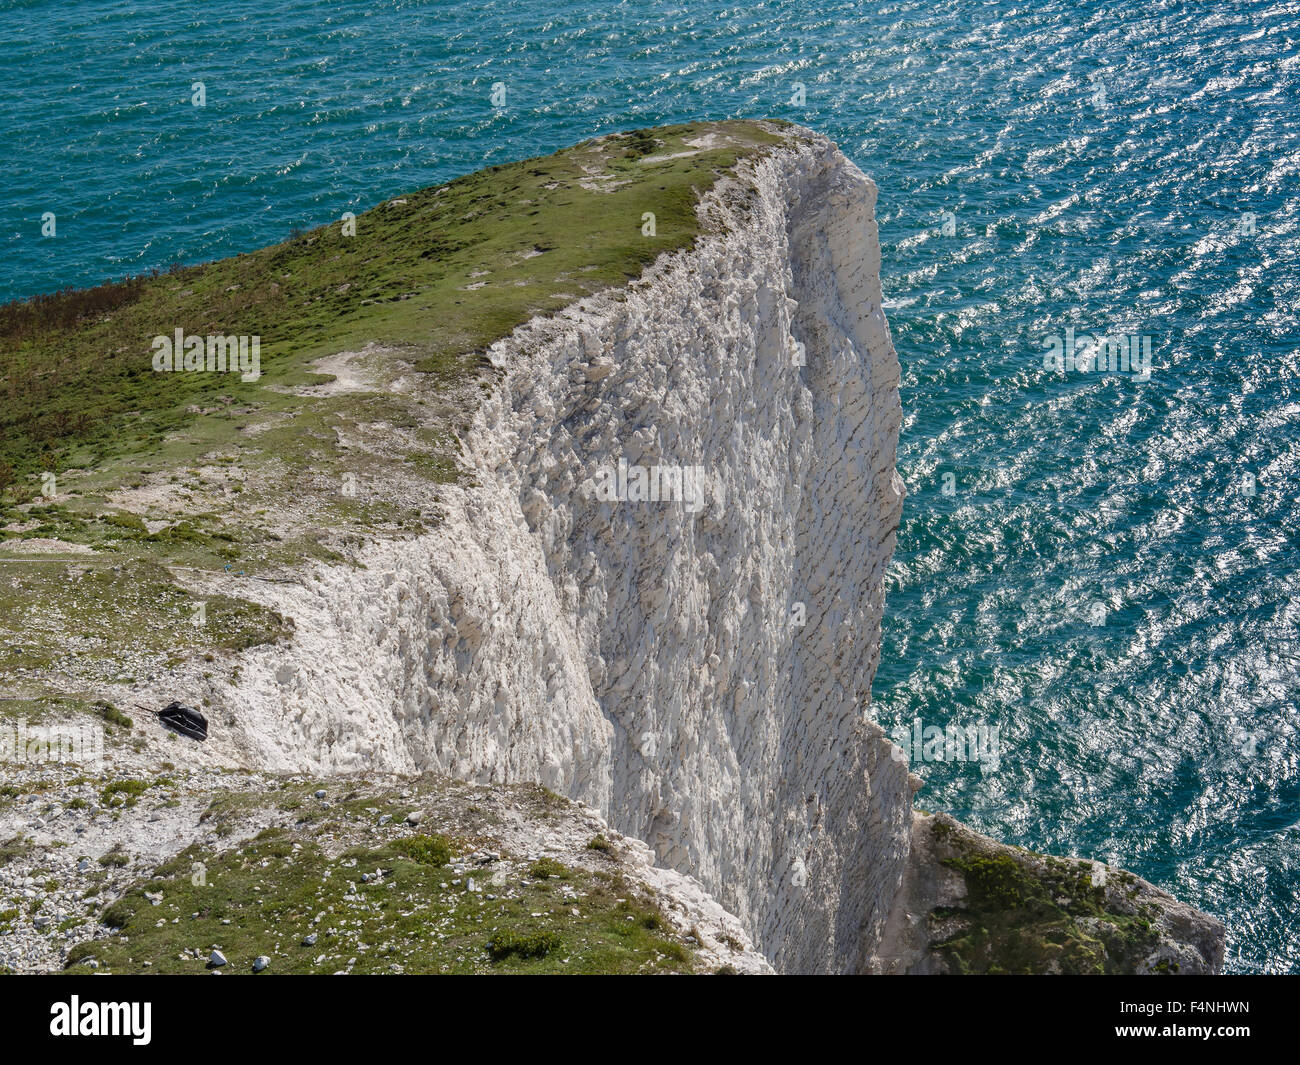 High Chalk Cliff near The Needles, Scratchell's Bay, Isle of Wight, England, UK Stock Photo